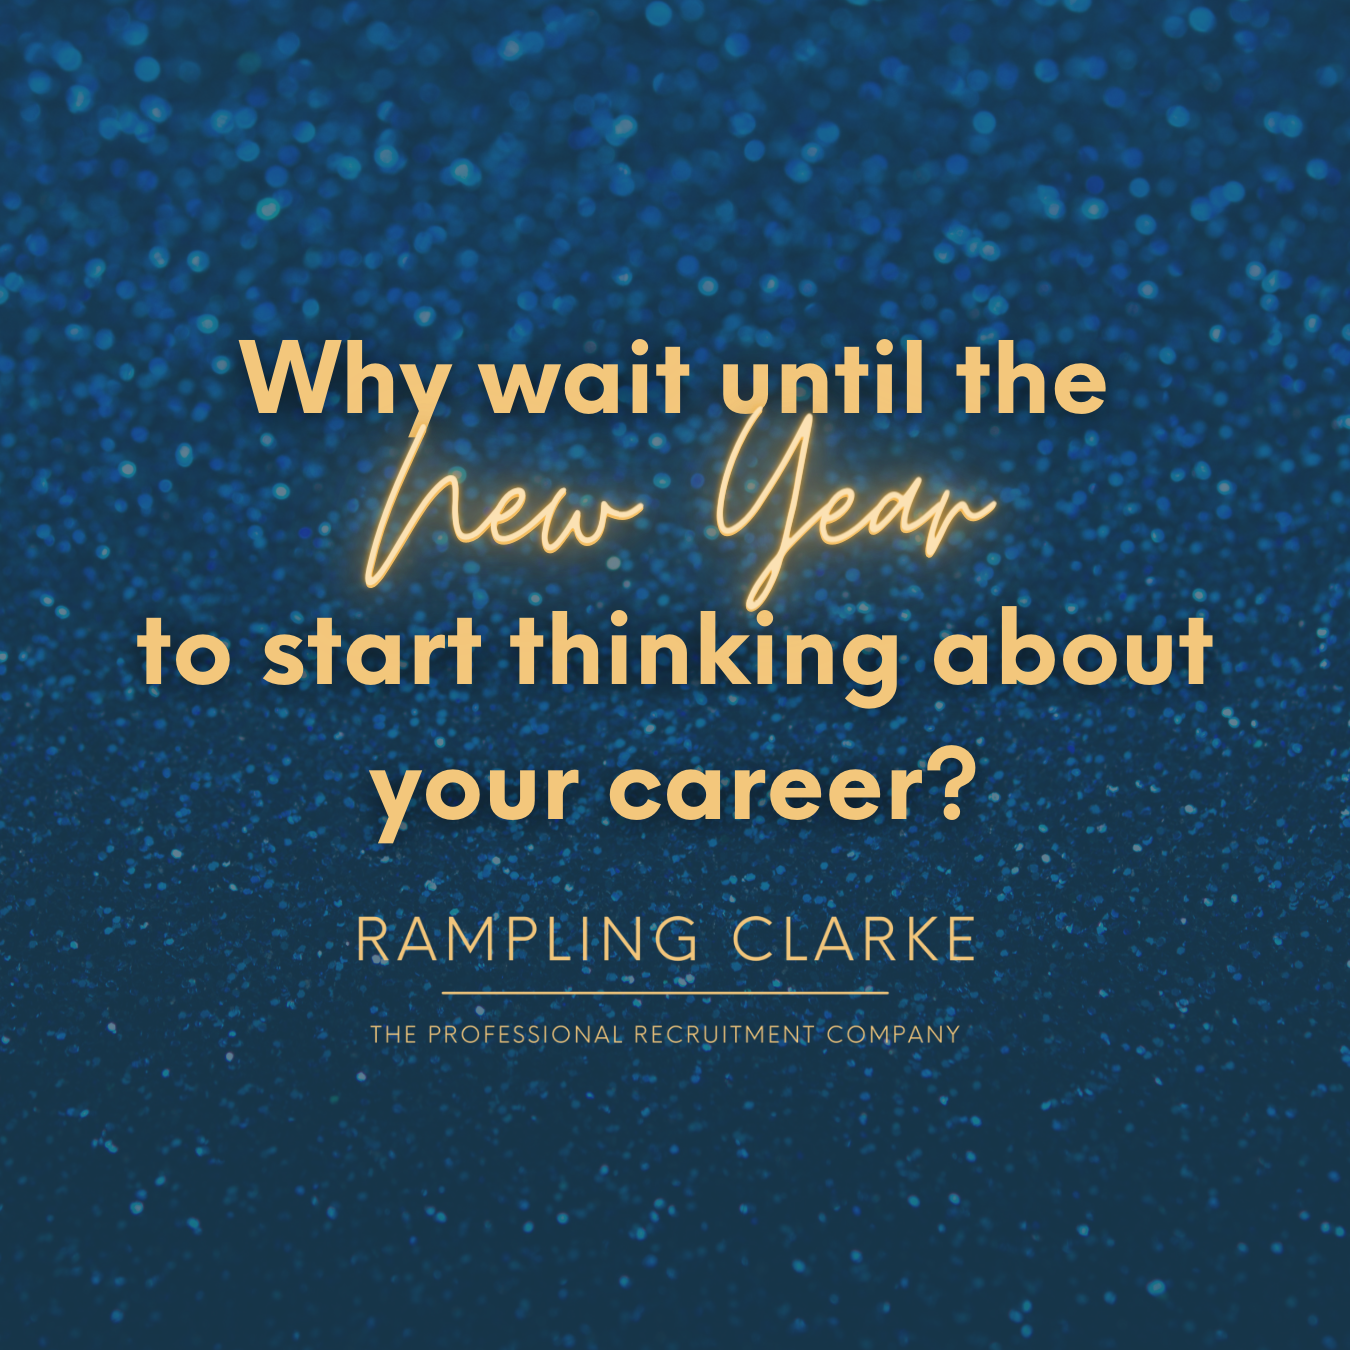 Blue glitter background. Gold writing says: "Why wait until the New Year to start thinking about your career?"